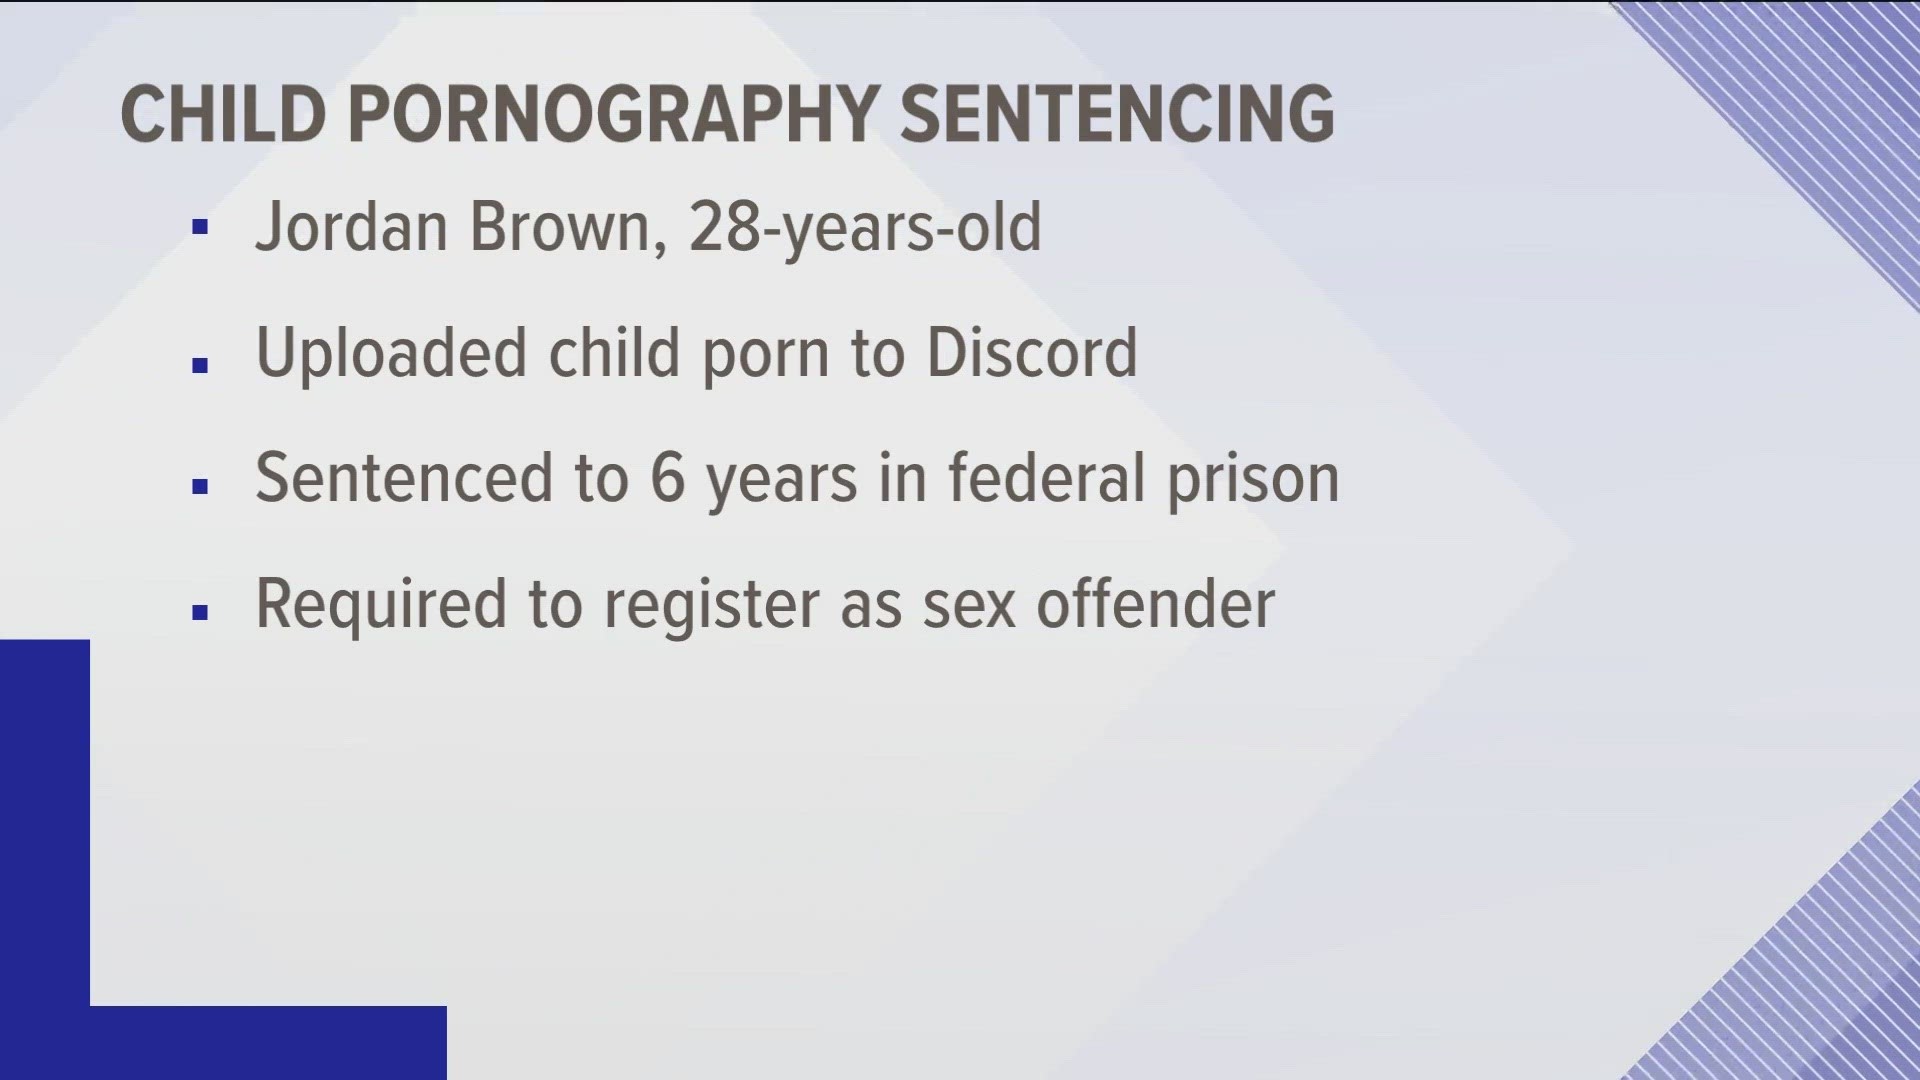 Jordan Brown, 28, was sentenced to 72 months in prison after investigators found images on his Discord account.